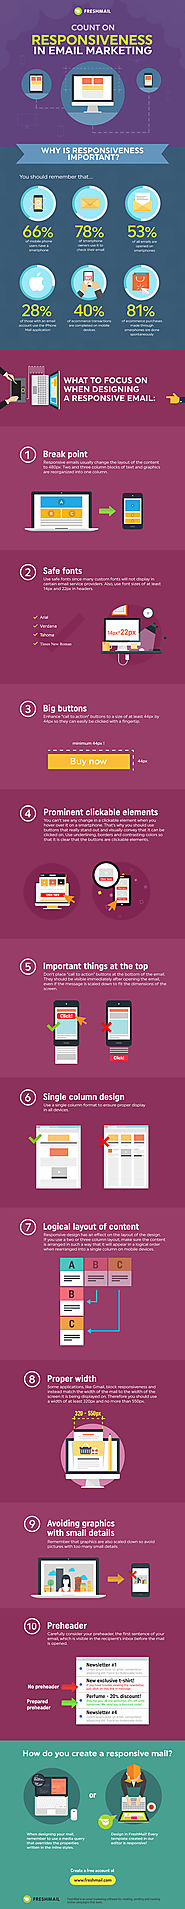 Make responsive email newsletters! #infographic